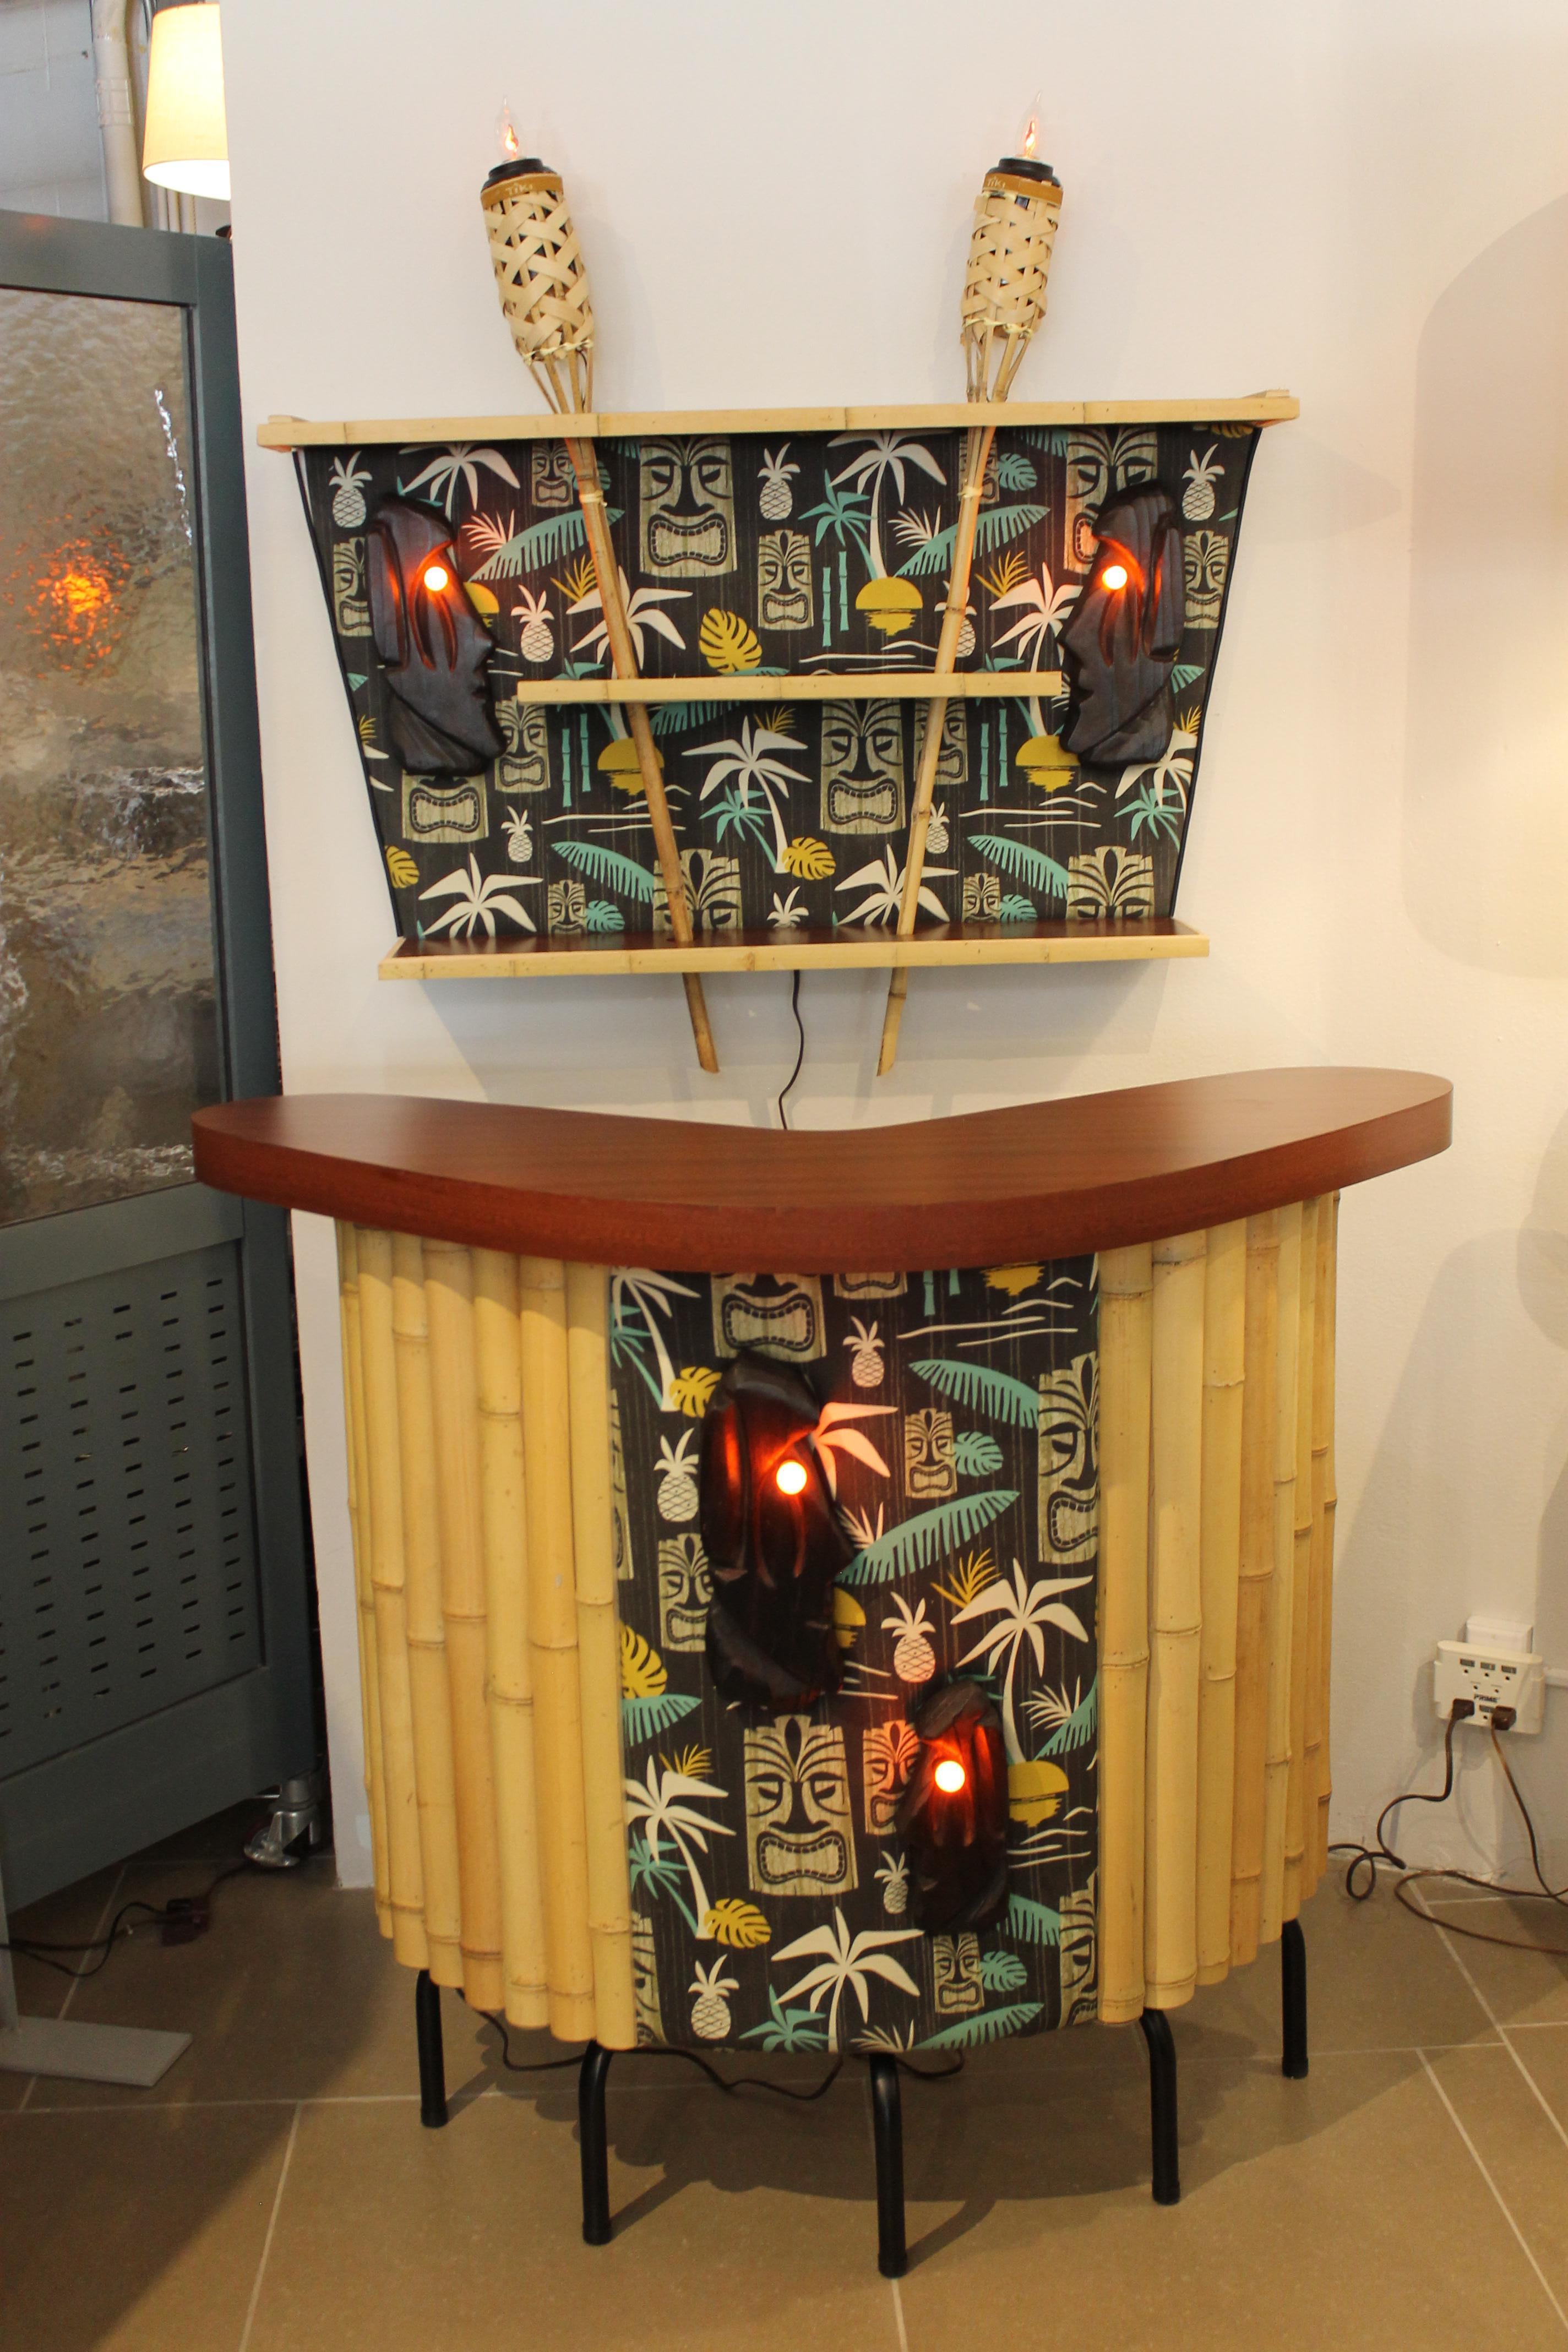 One of a kind studio made tiki bar with back bar and a pair of bar stools. Contains new heavy canvas fabric in vintage style. 
Bar measures: 50